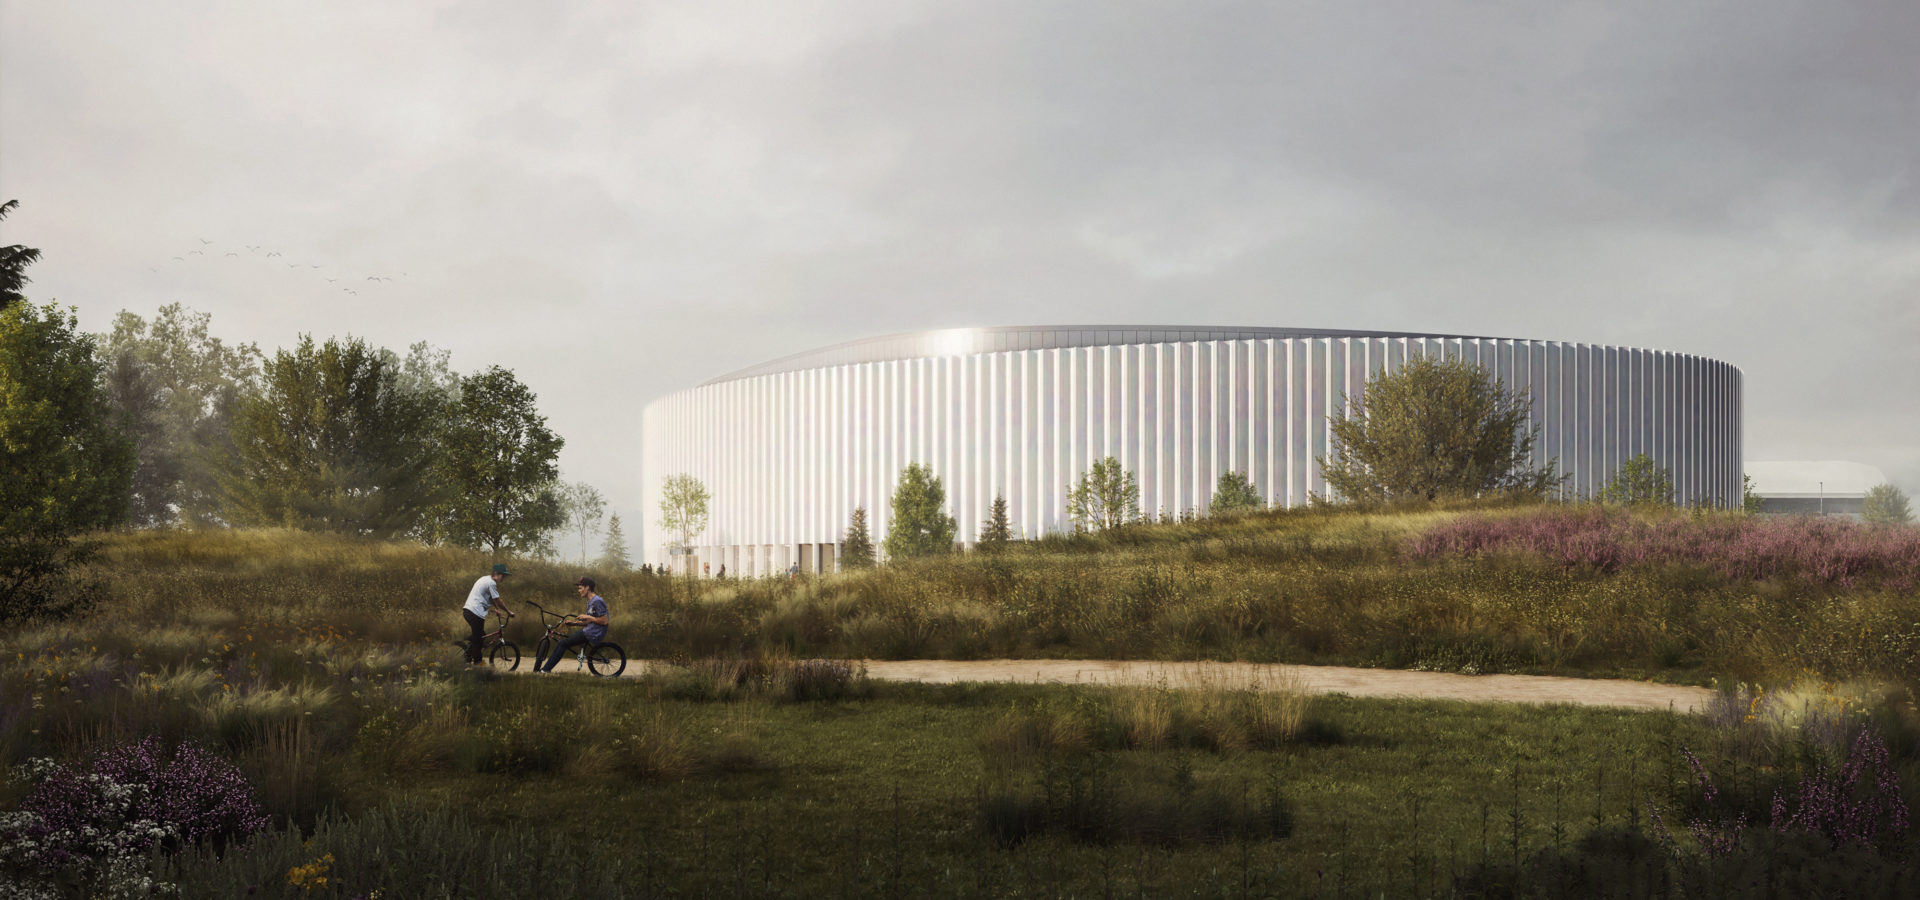 National Velodrome And Badminton Centre Sport Ireland Campus Dublin Planning Approval Faulknerbrowns Architects Hh